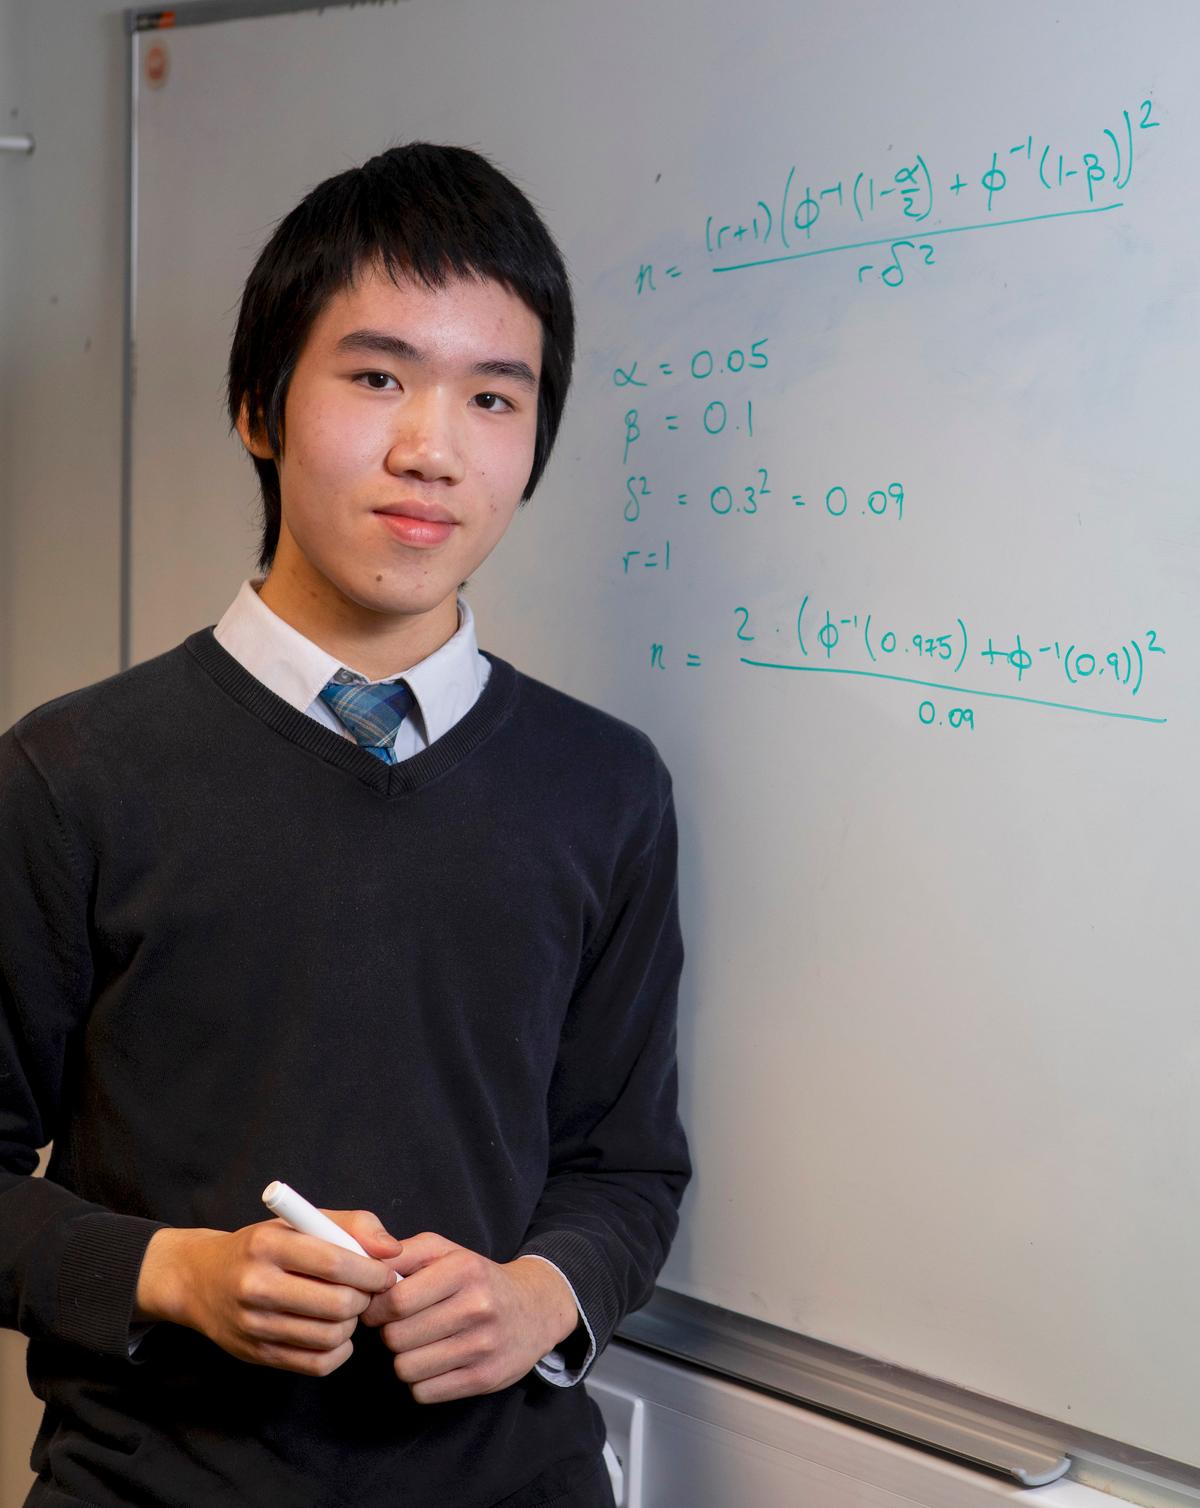 15-year-old Wang Pok Lo graduated with a Master's degree in Statistics with Medical Application. (©SWNS)